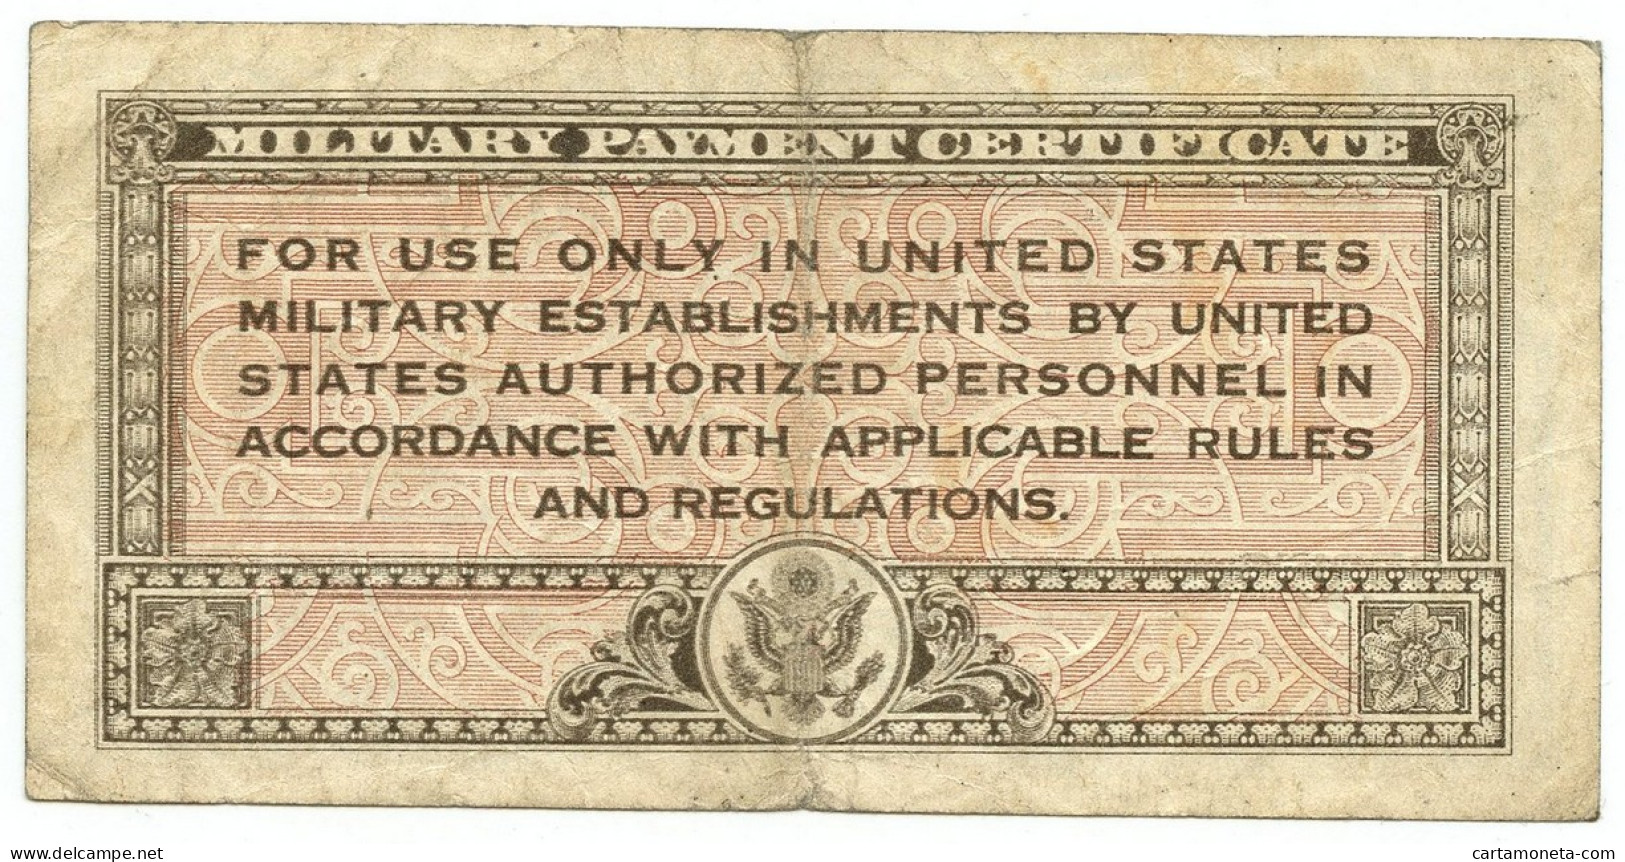 25 CENTS MILITARY PAYMENT CERTIFICATE SERIES 461 UNITED STATES 17/09/1946 BB- - Occupation Alliés Seconde Guerre Mondiale